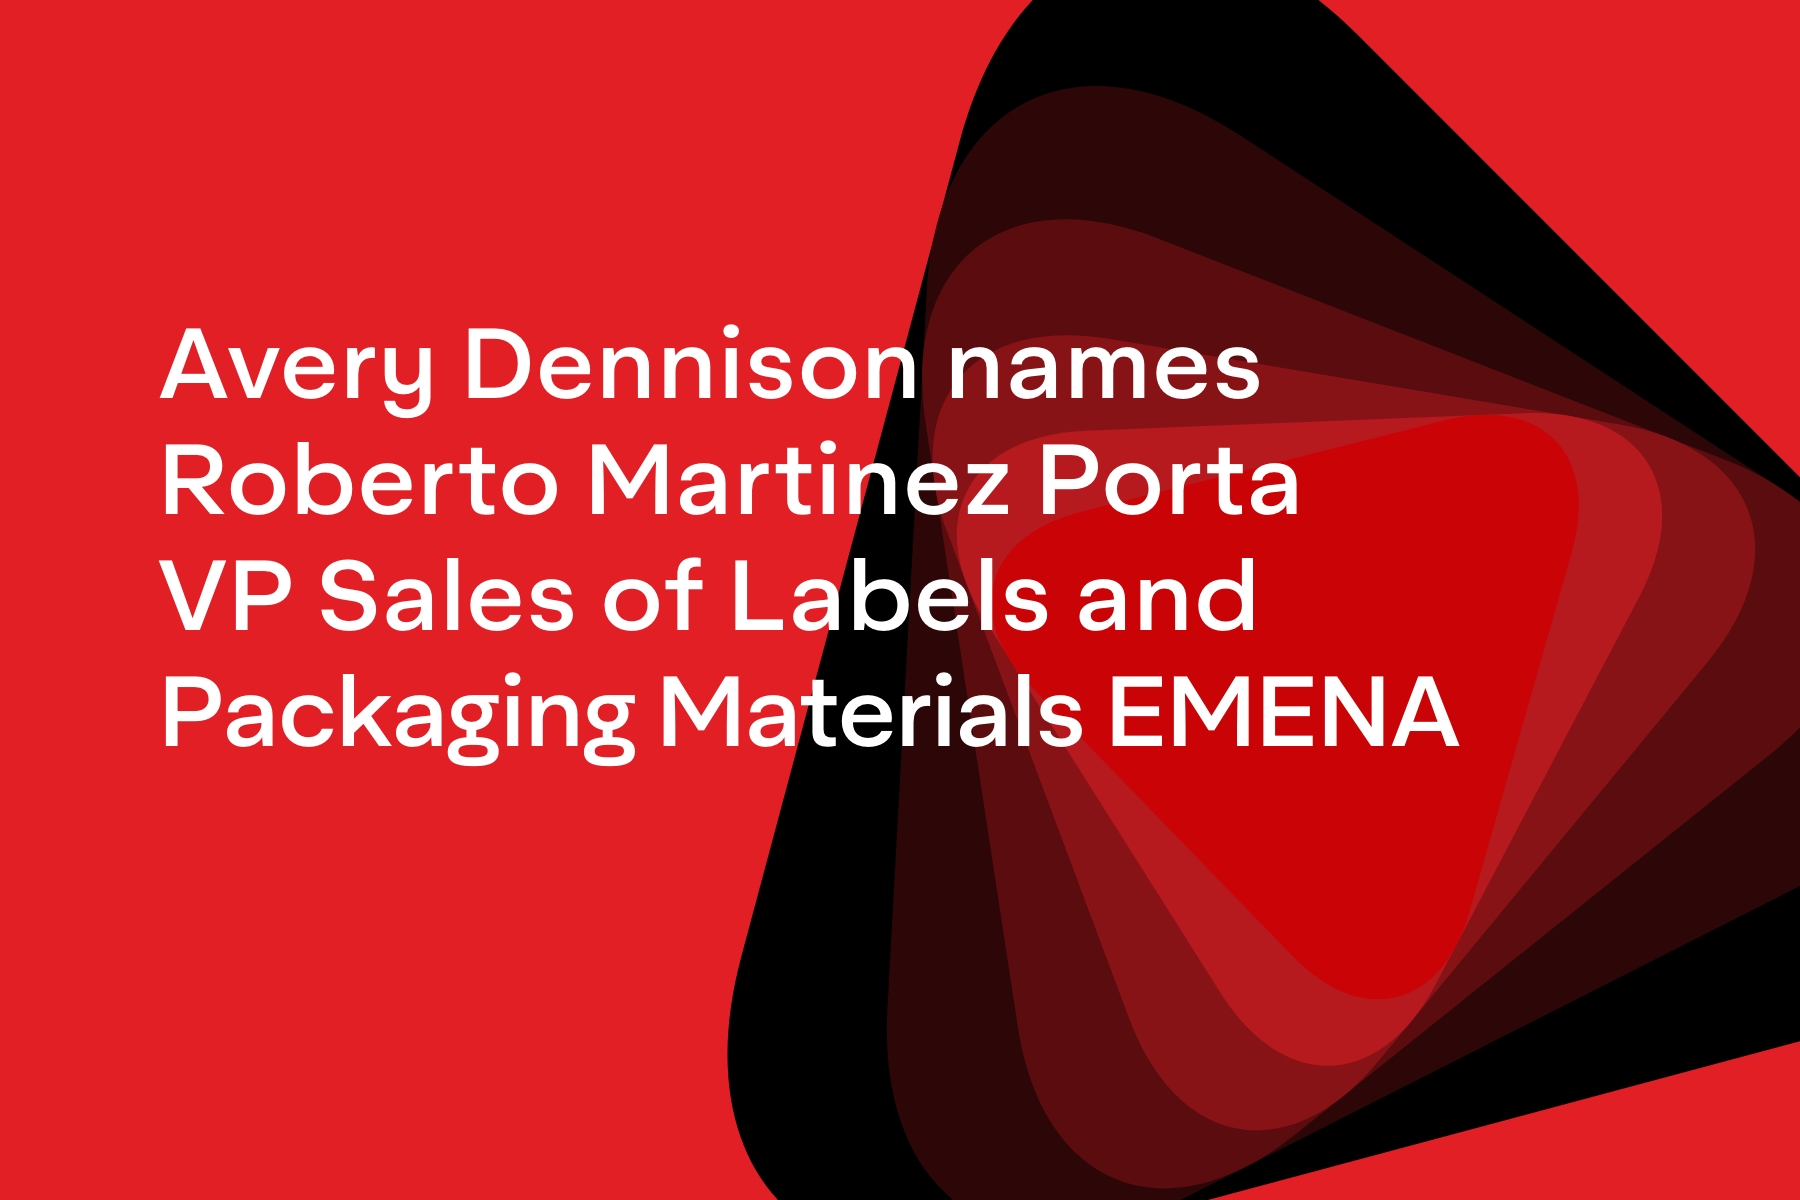  Avery Dennison names Roberto Martinez Porta VP Sales of Labels and Packaging Materials EMENA